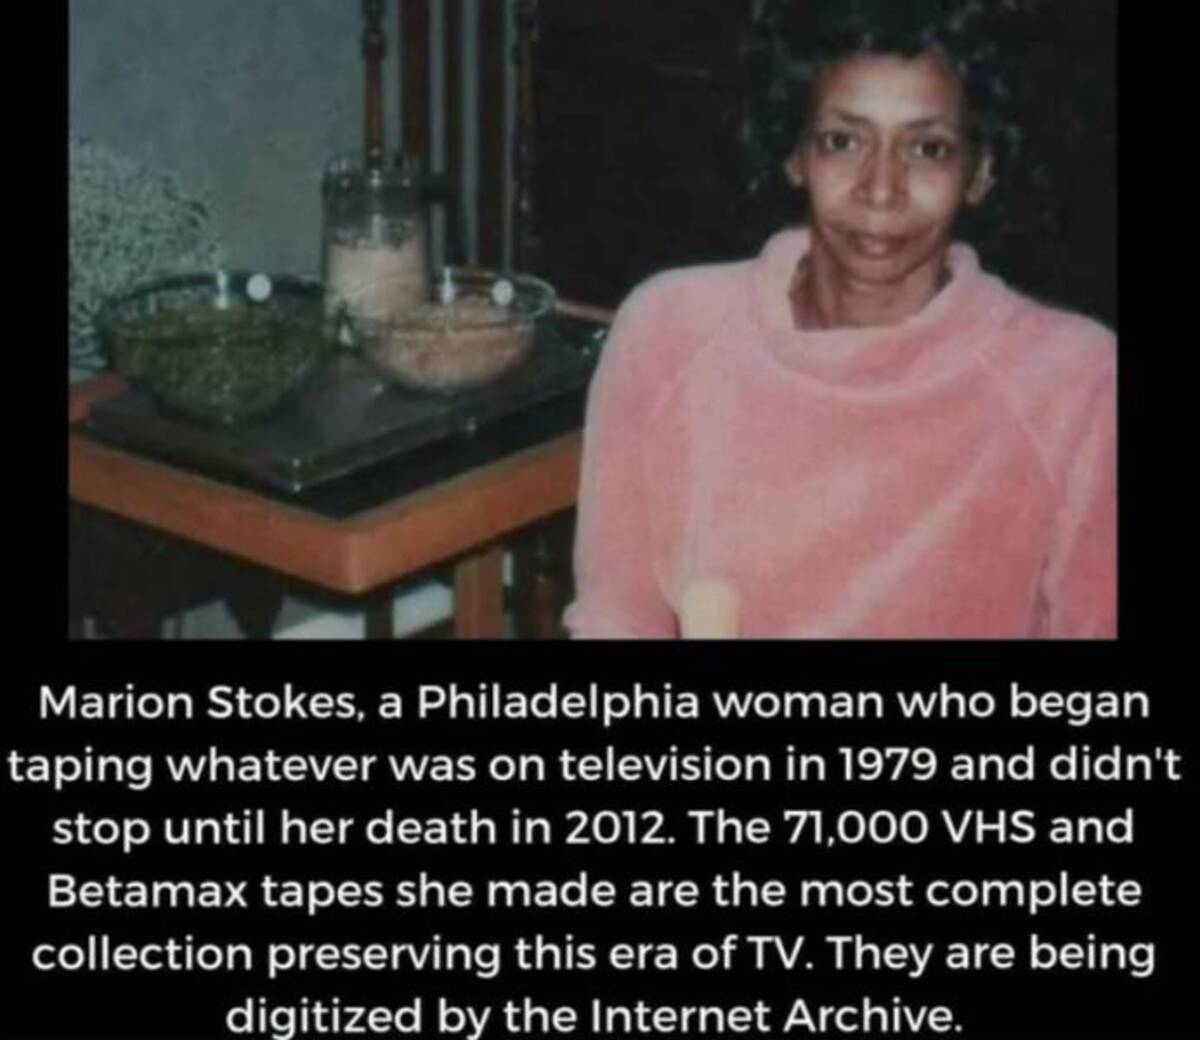 photo caption - Marion Stokes, a Philadelphia woman who began taping whatever was on television in 1979 and didn't stop until her death in 2012. The 71,000 Vhs and Betamax tapes she made are the most complete collection preserving this era of Tv. They are